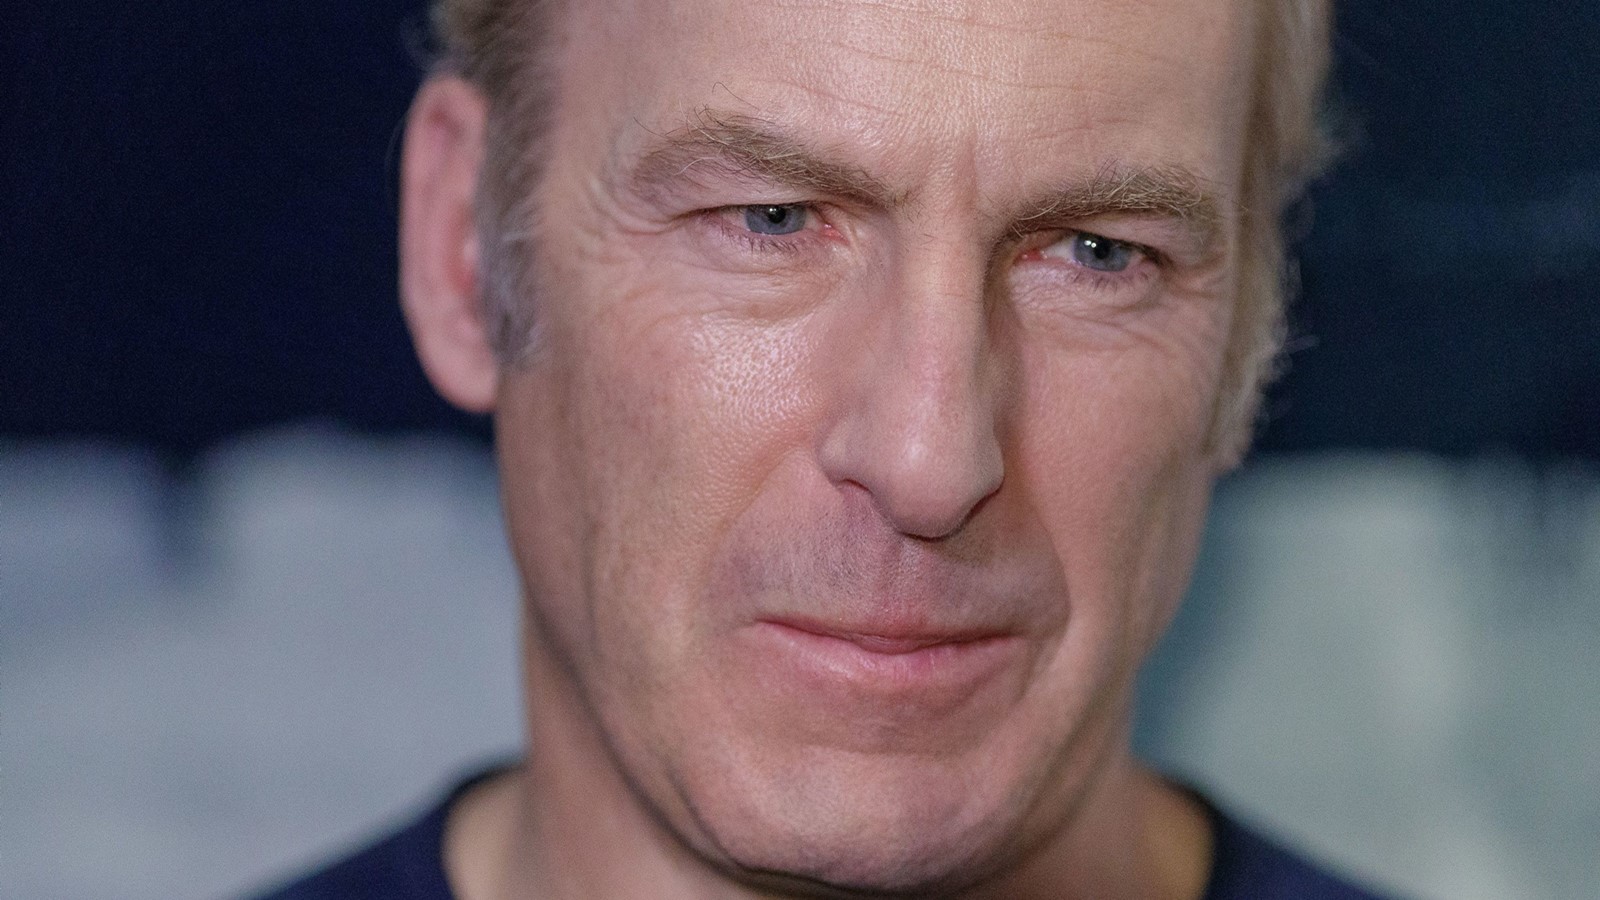 Bob Odenkirk reveals why he is not interested in the MCU: "I'm not made for that world"